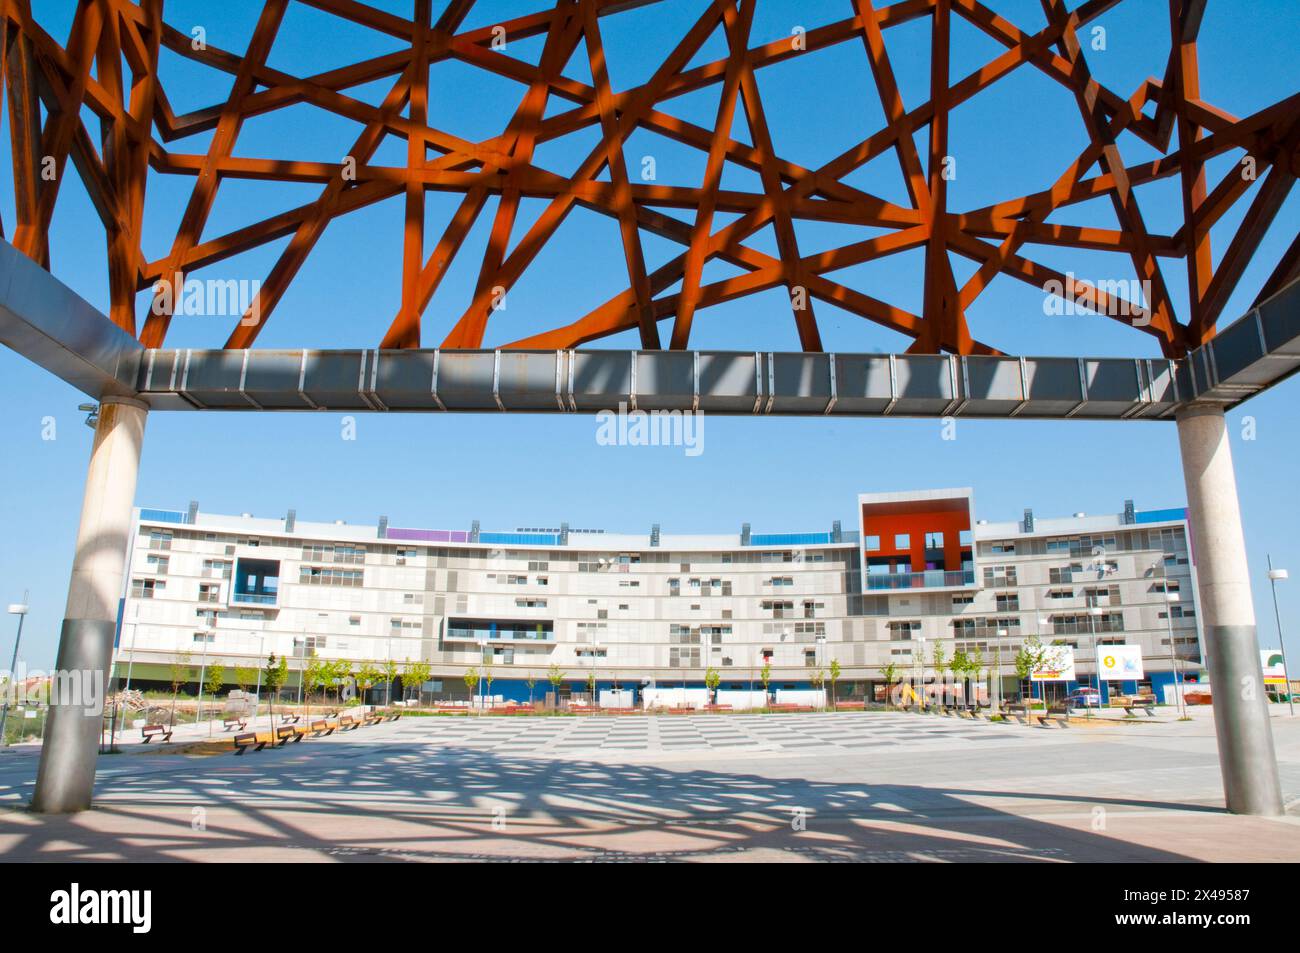 Hemiciclo solar building, view from below a modern sculpture. Plaza del Sol, Mostoles, Madrid province, Spain. Stock Photo